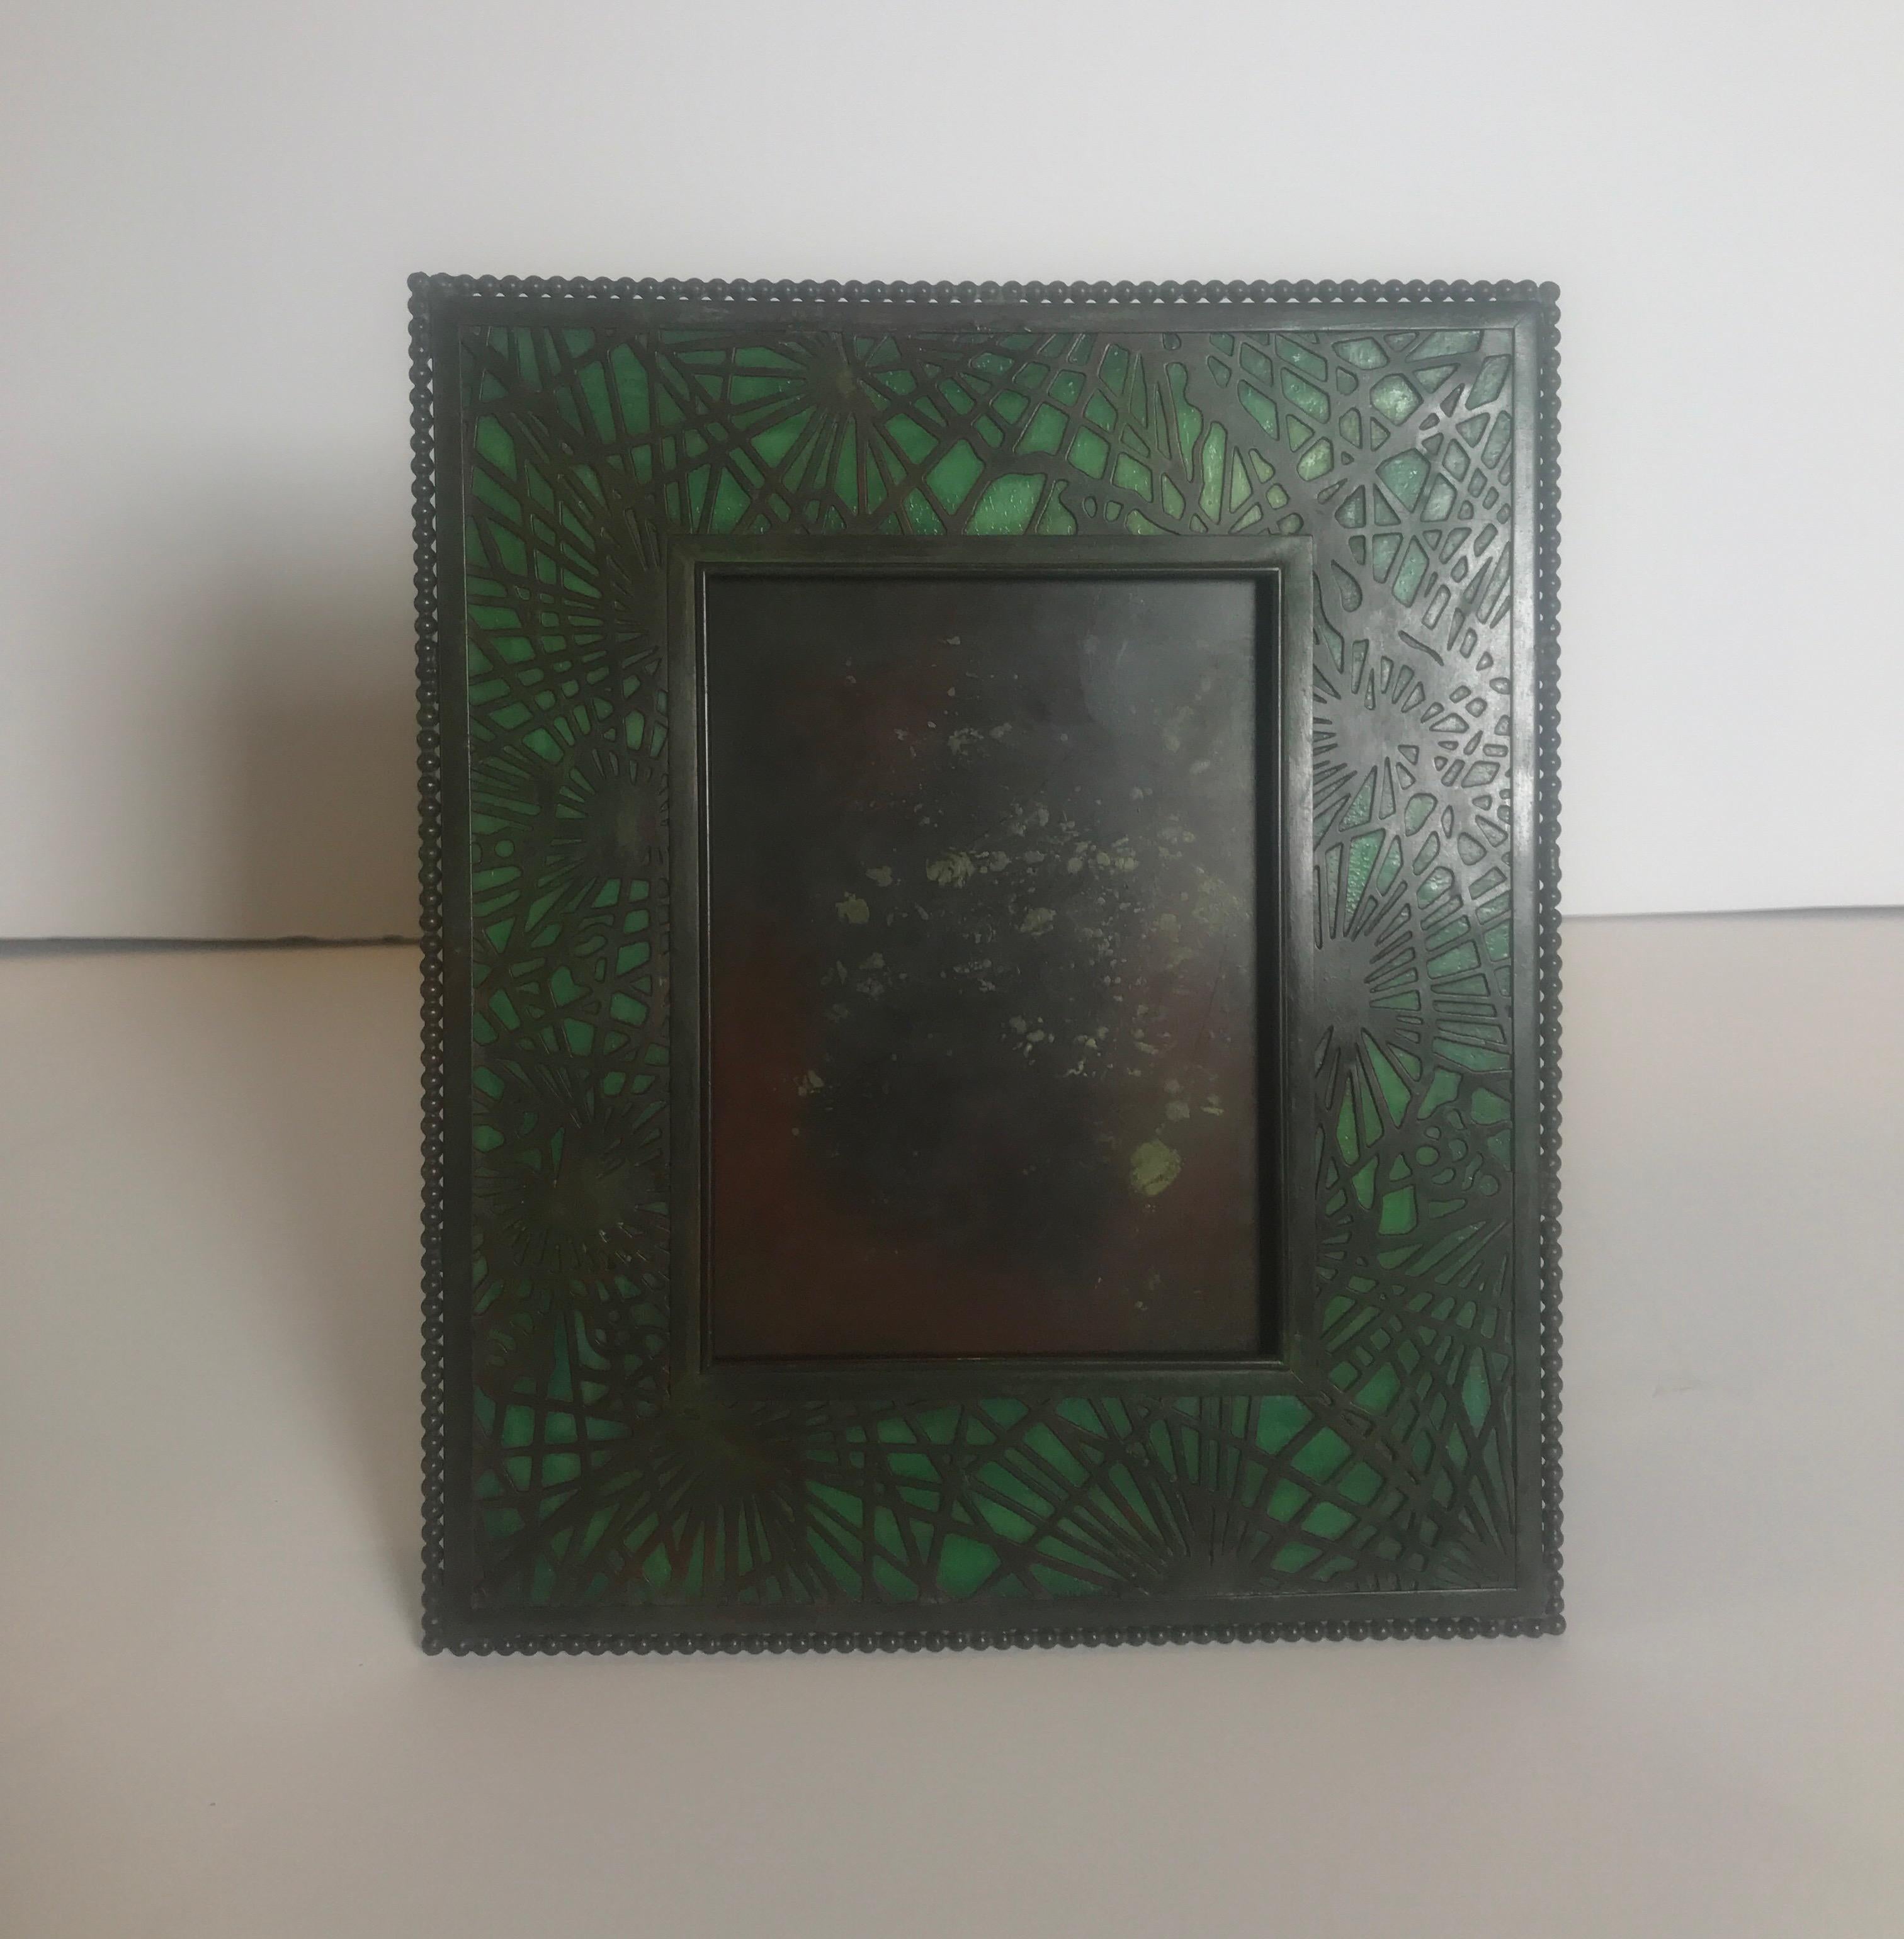 Tiffany studios pine needle frame. Etched metal design, in the pine needle pattern, is set against a green striated glass and has a desirable green-brown patina finish. Frame is finished with a single row of bronze beads to inner and outer edge.